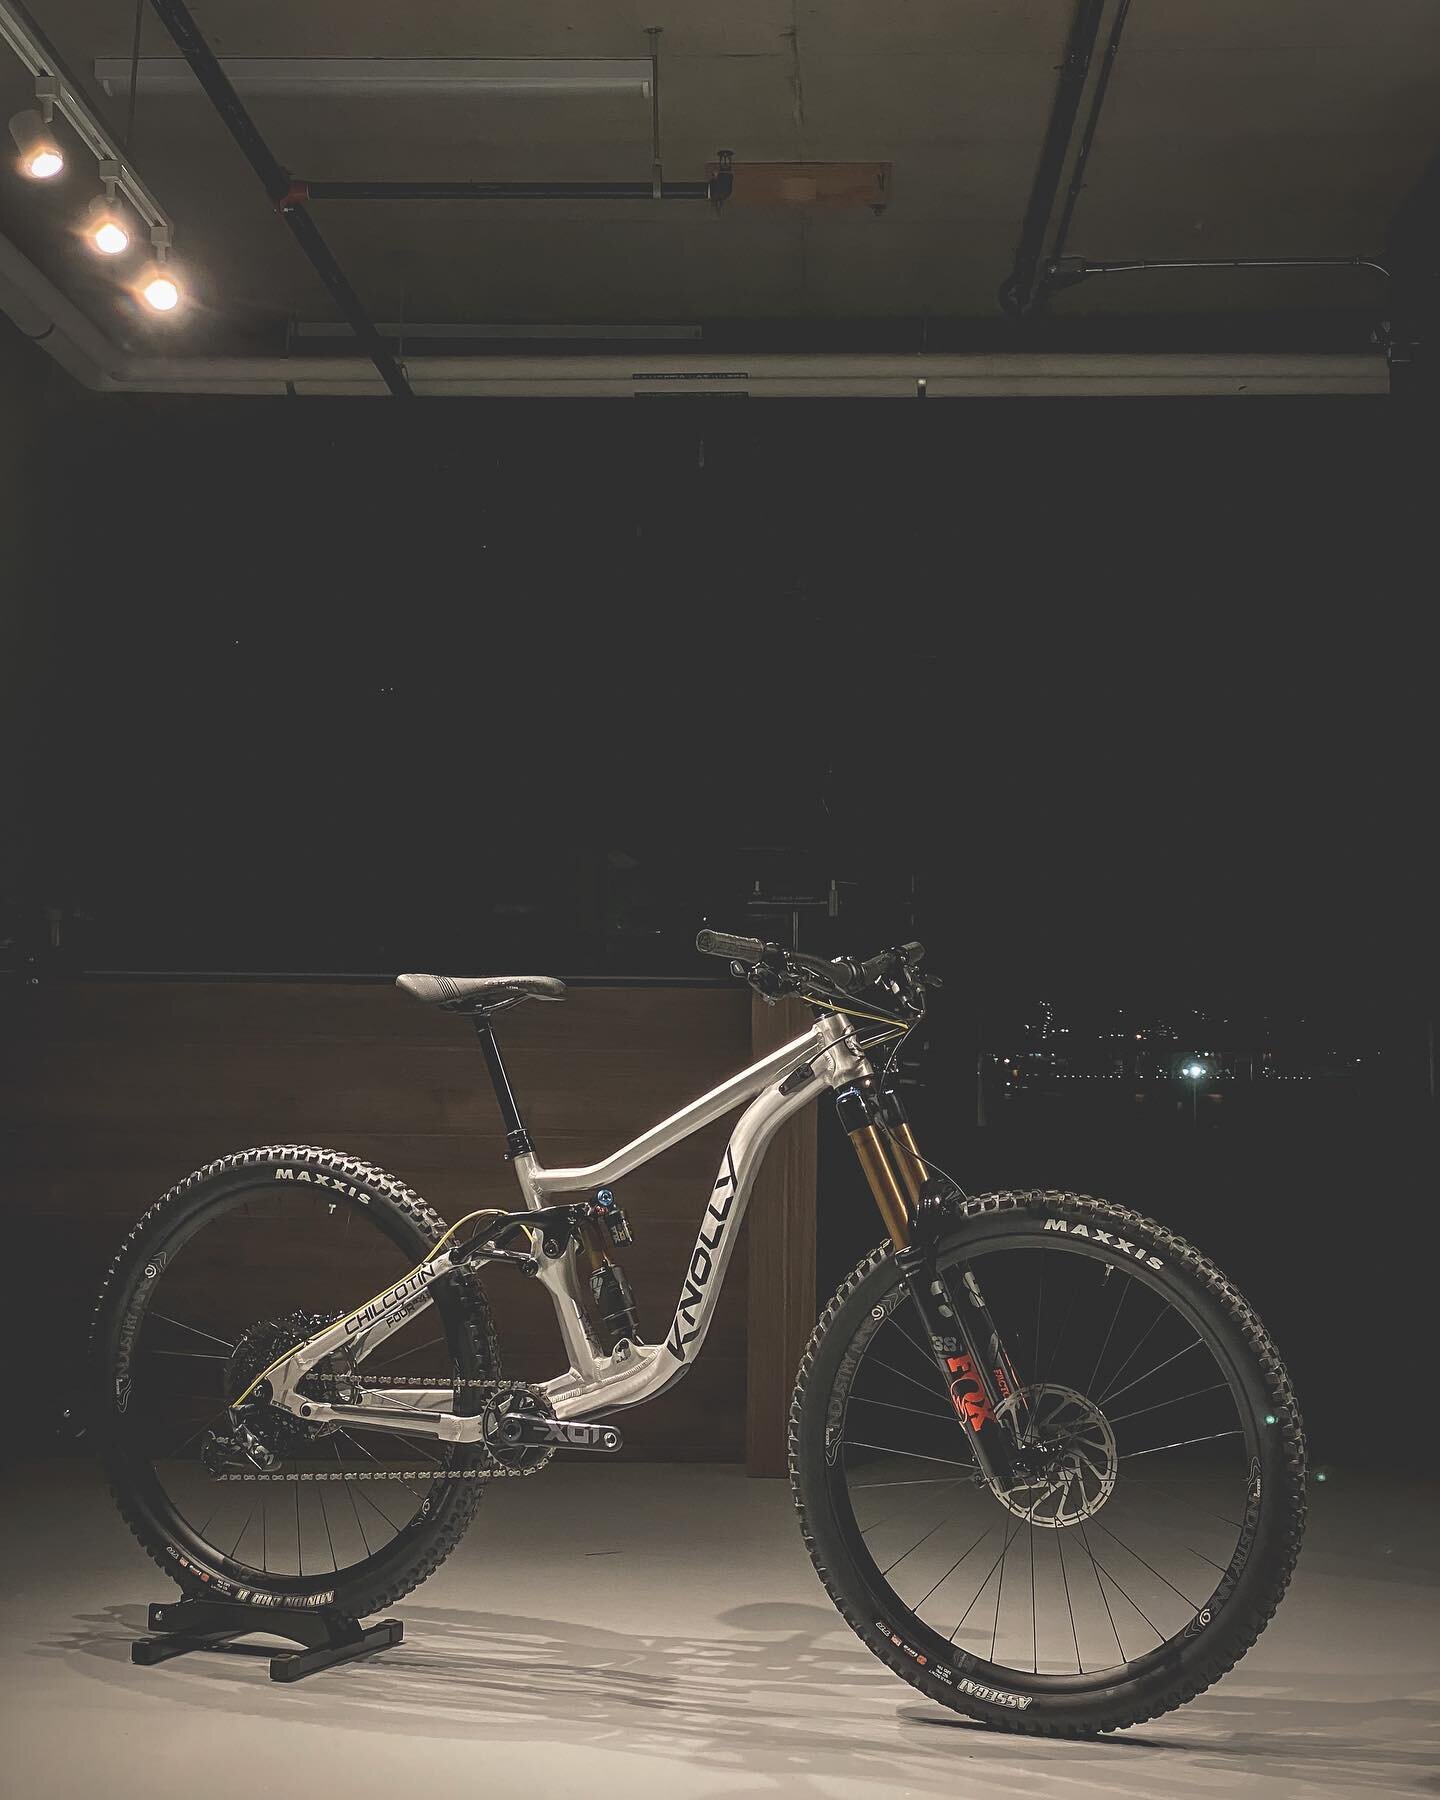 2021 Knolly Chilcotin 151 with XO1 build Kit. Ride Wrap Tailor Kit Applied.
.
.
.
#knolly #knollybikes #ridewrap #foxracingshox #industrynine #northshore #chilcotin #raw #fox38 #sram #srameagle #srammtb #raceface #maxxistires #twowheelsadventure #sho